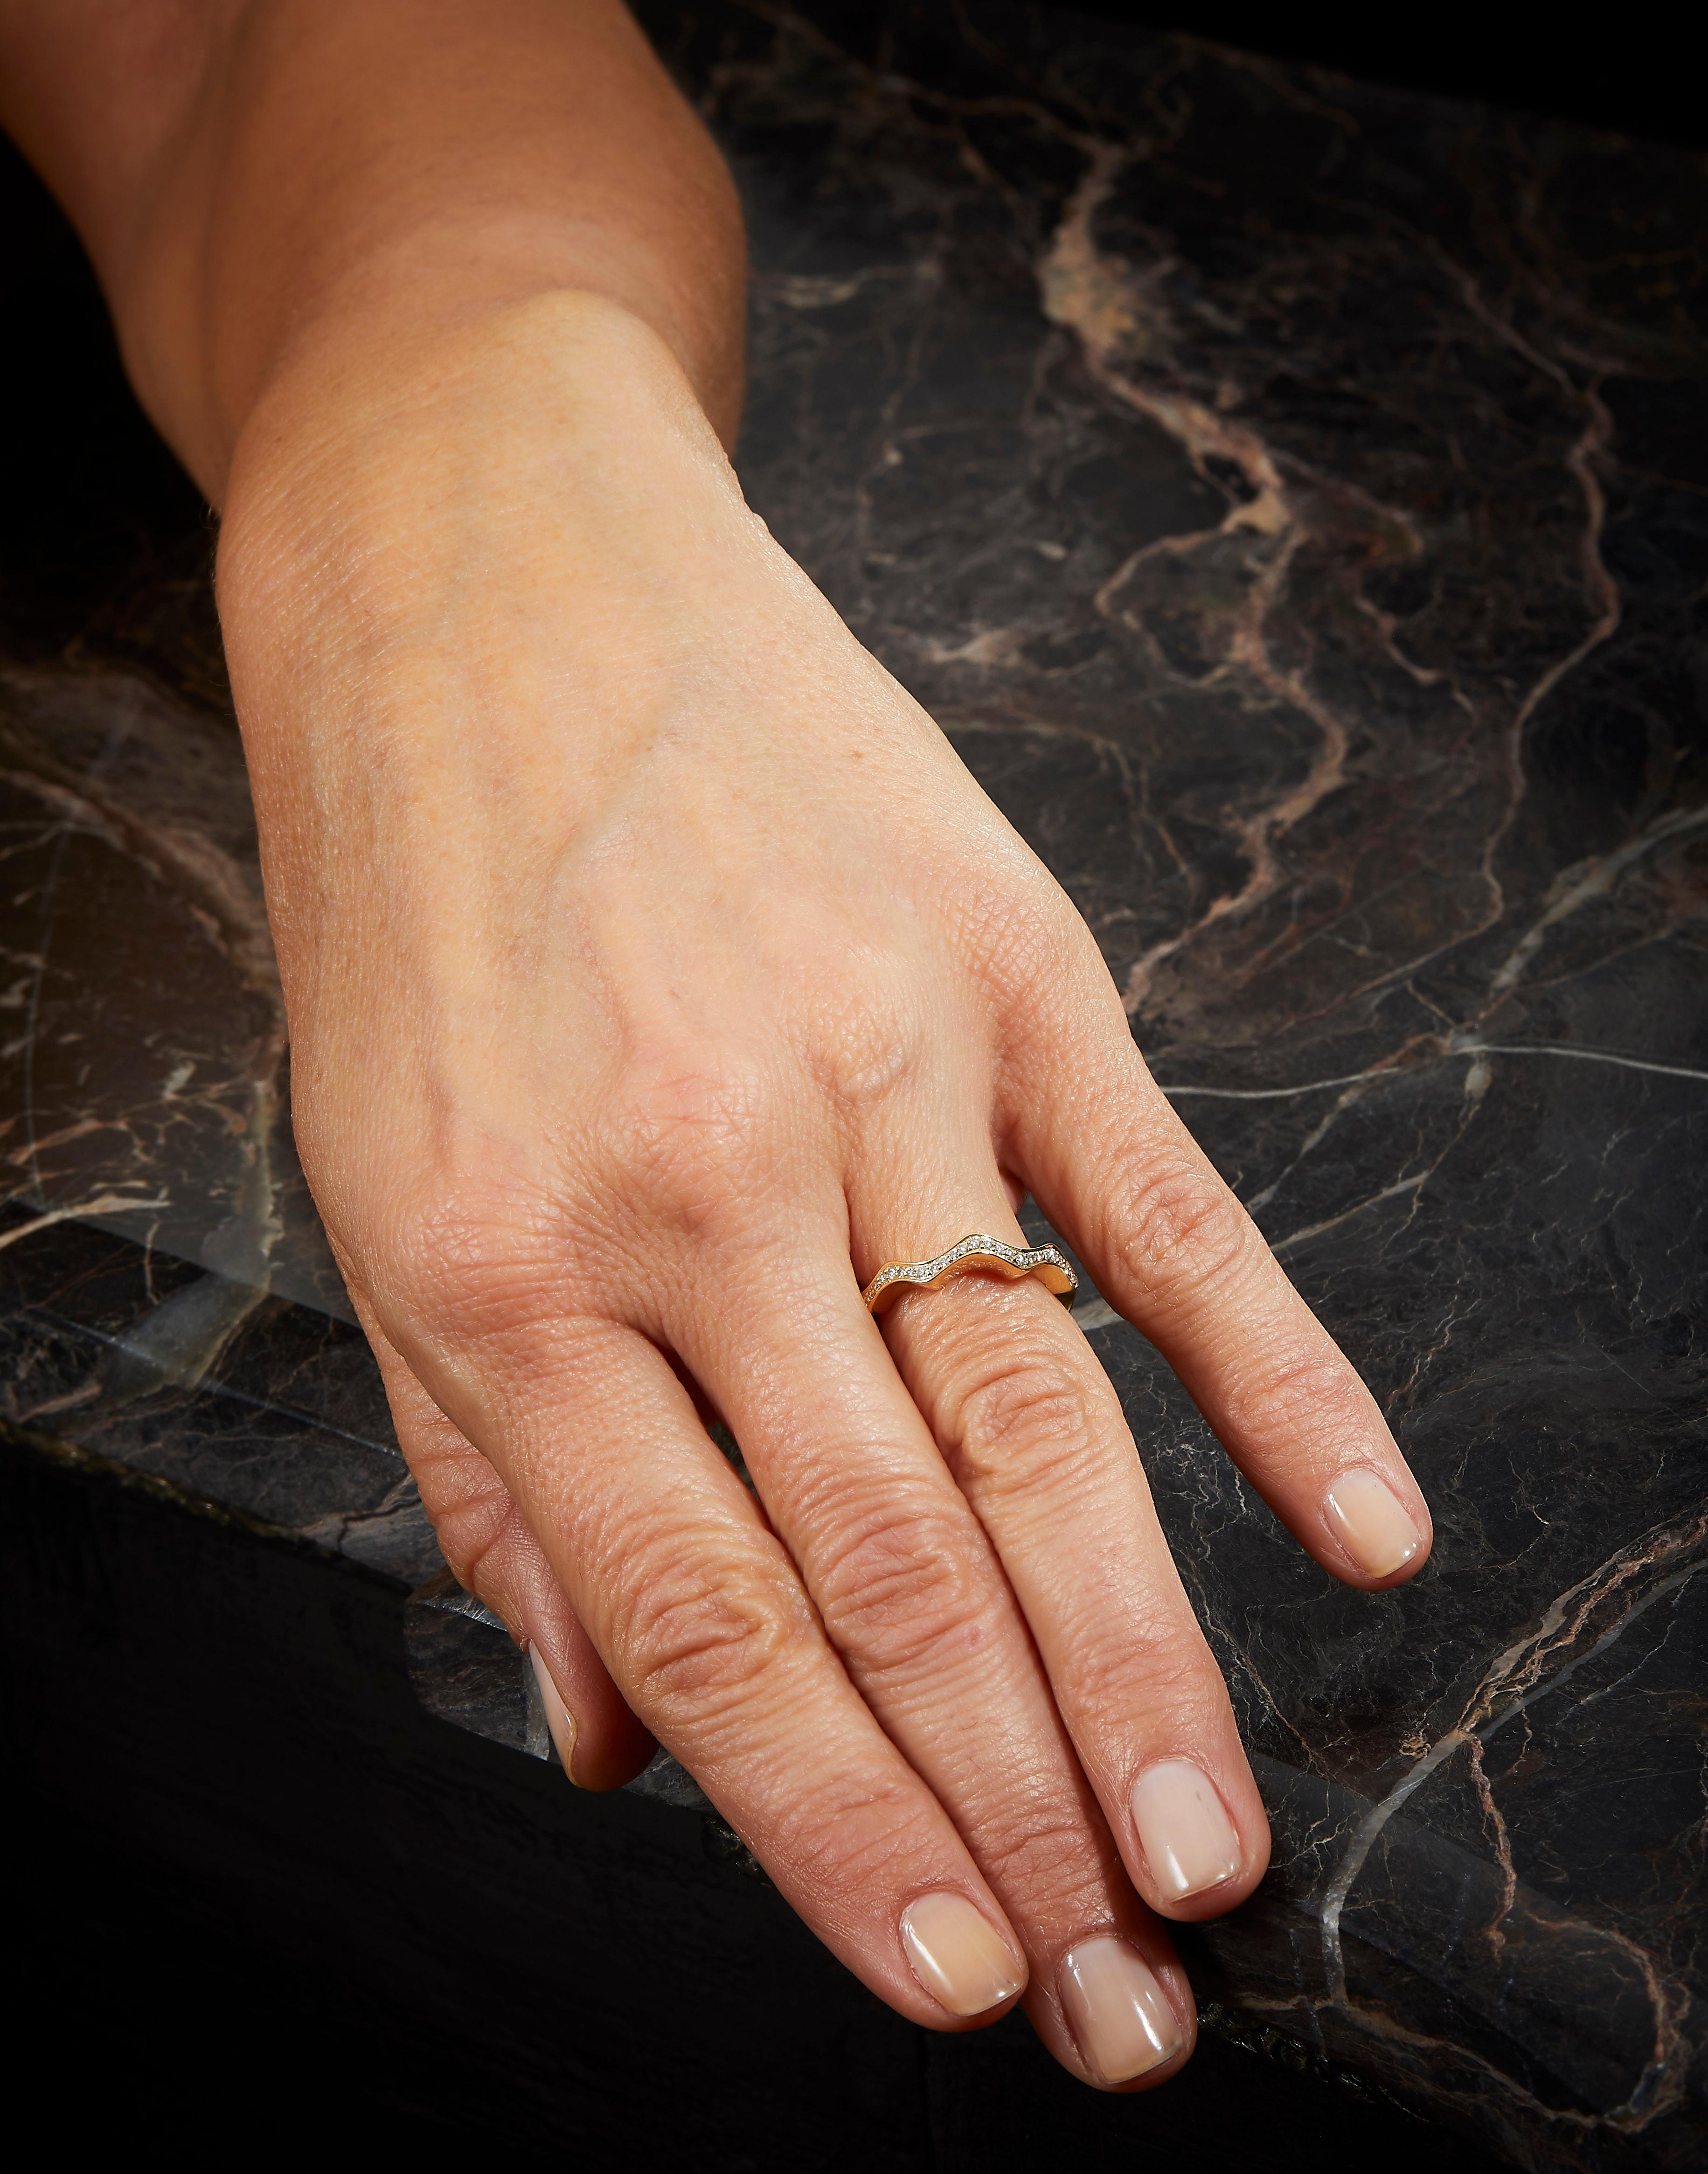 Designed by Eva Soussana, artist and founder of Hera-Jewellery, this very elegant and ultra refined wedding ring from the 